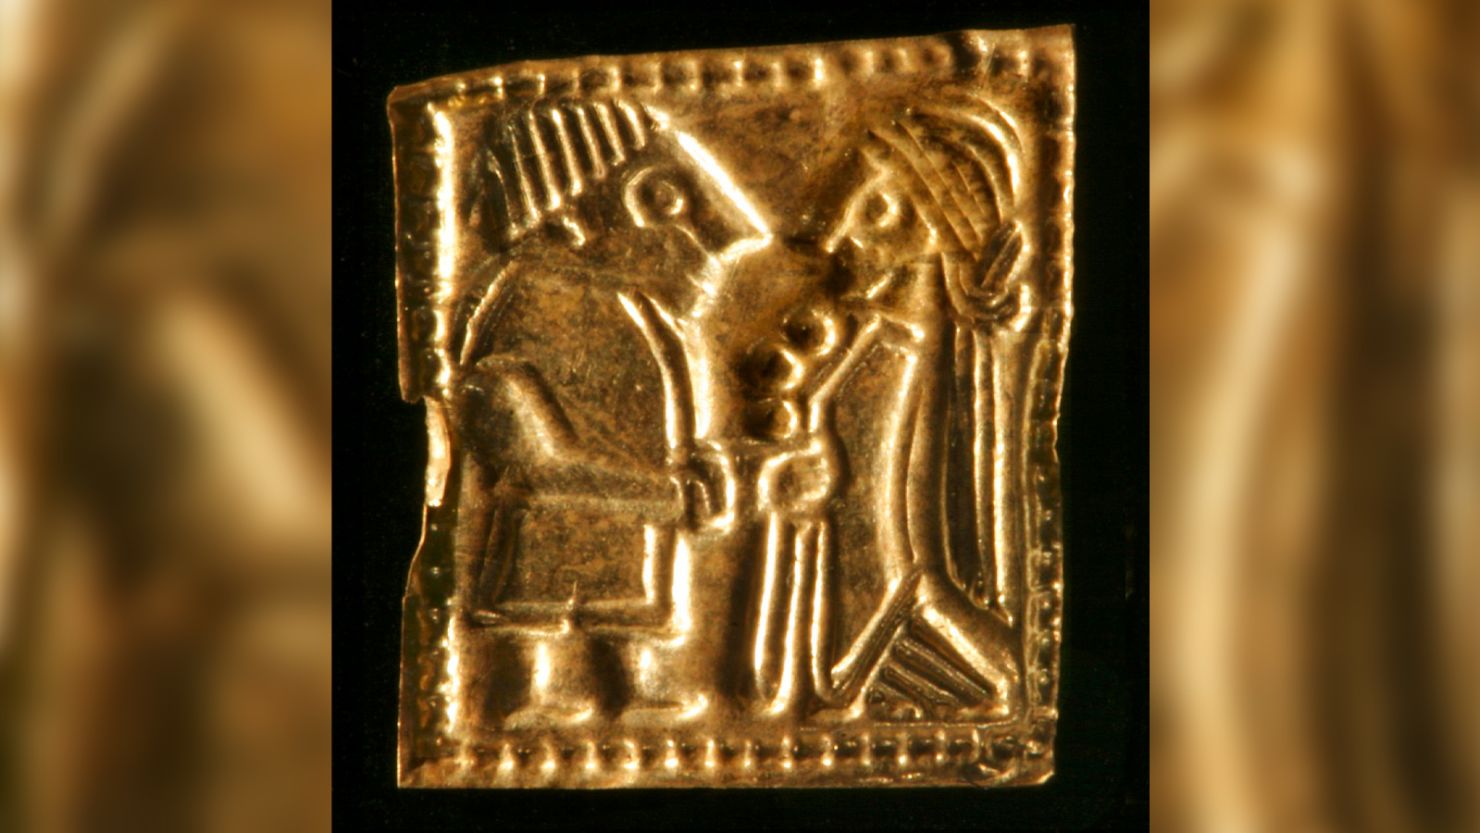 In Hov, Norway, five gold foil figures have been recently uncovered. Their purpose remains unclear, according to archaeologists.